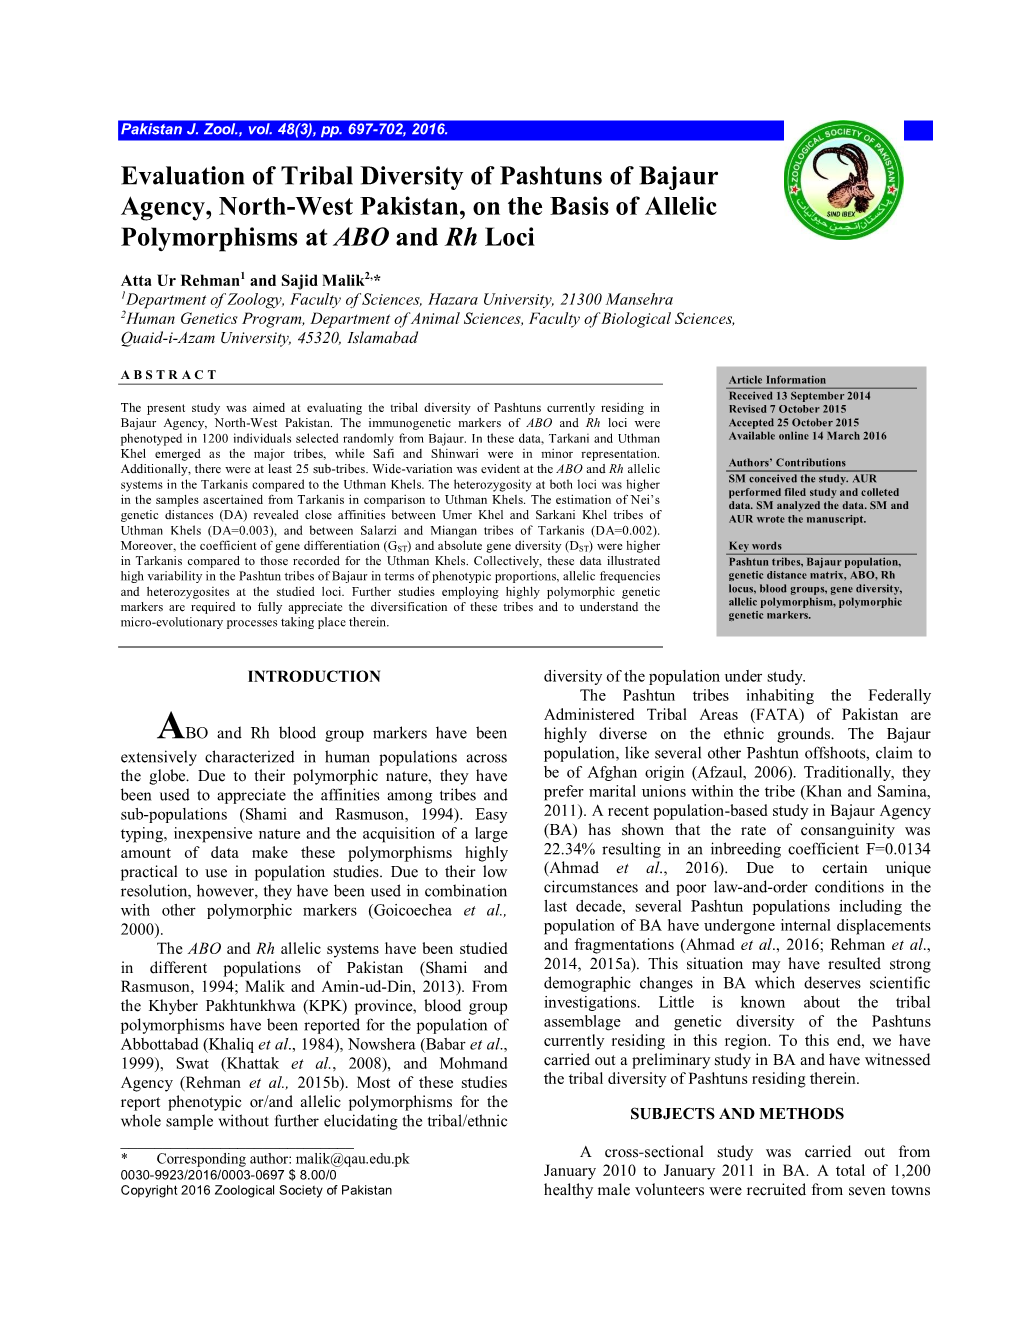 Evaluation of Tribal Diversity of Pashtuns of Bajaur Agency, North-West Pakistan, on the Basis of Allelic Polymorphisms at ABO and Rh Loci